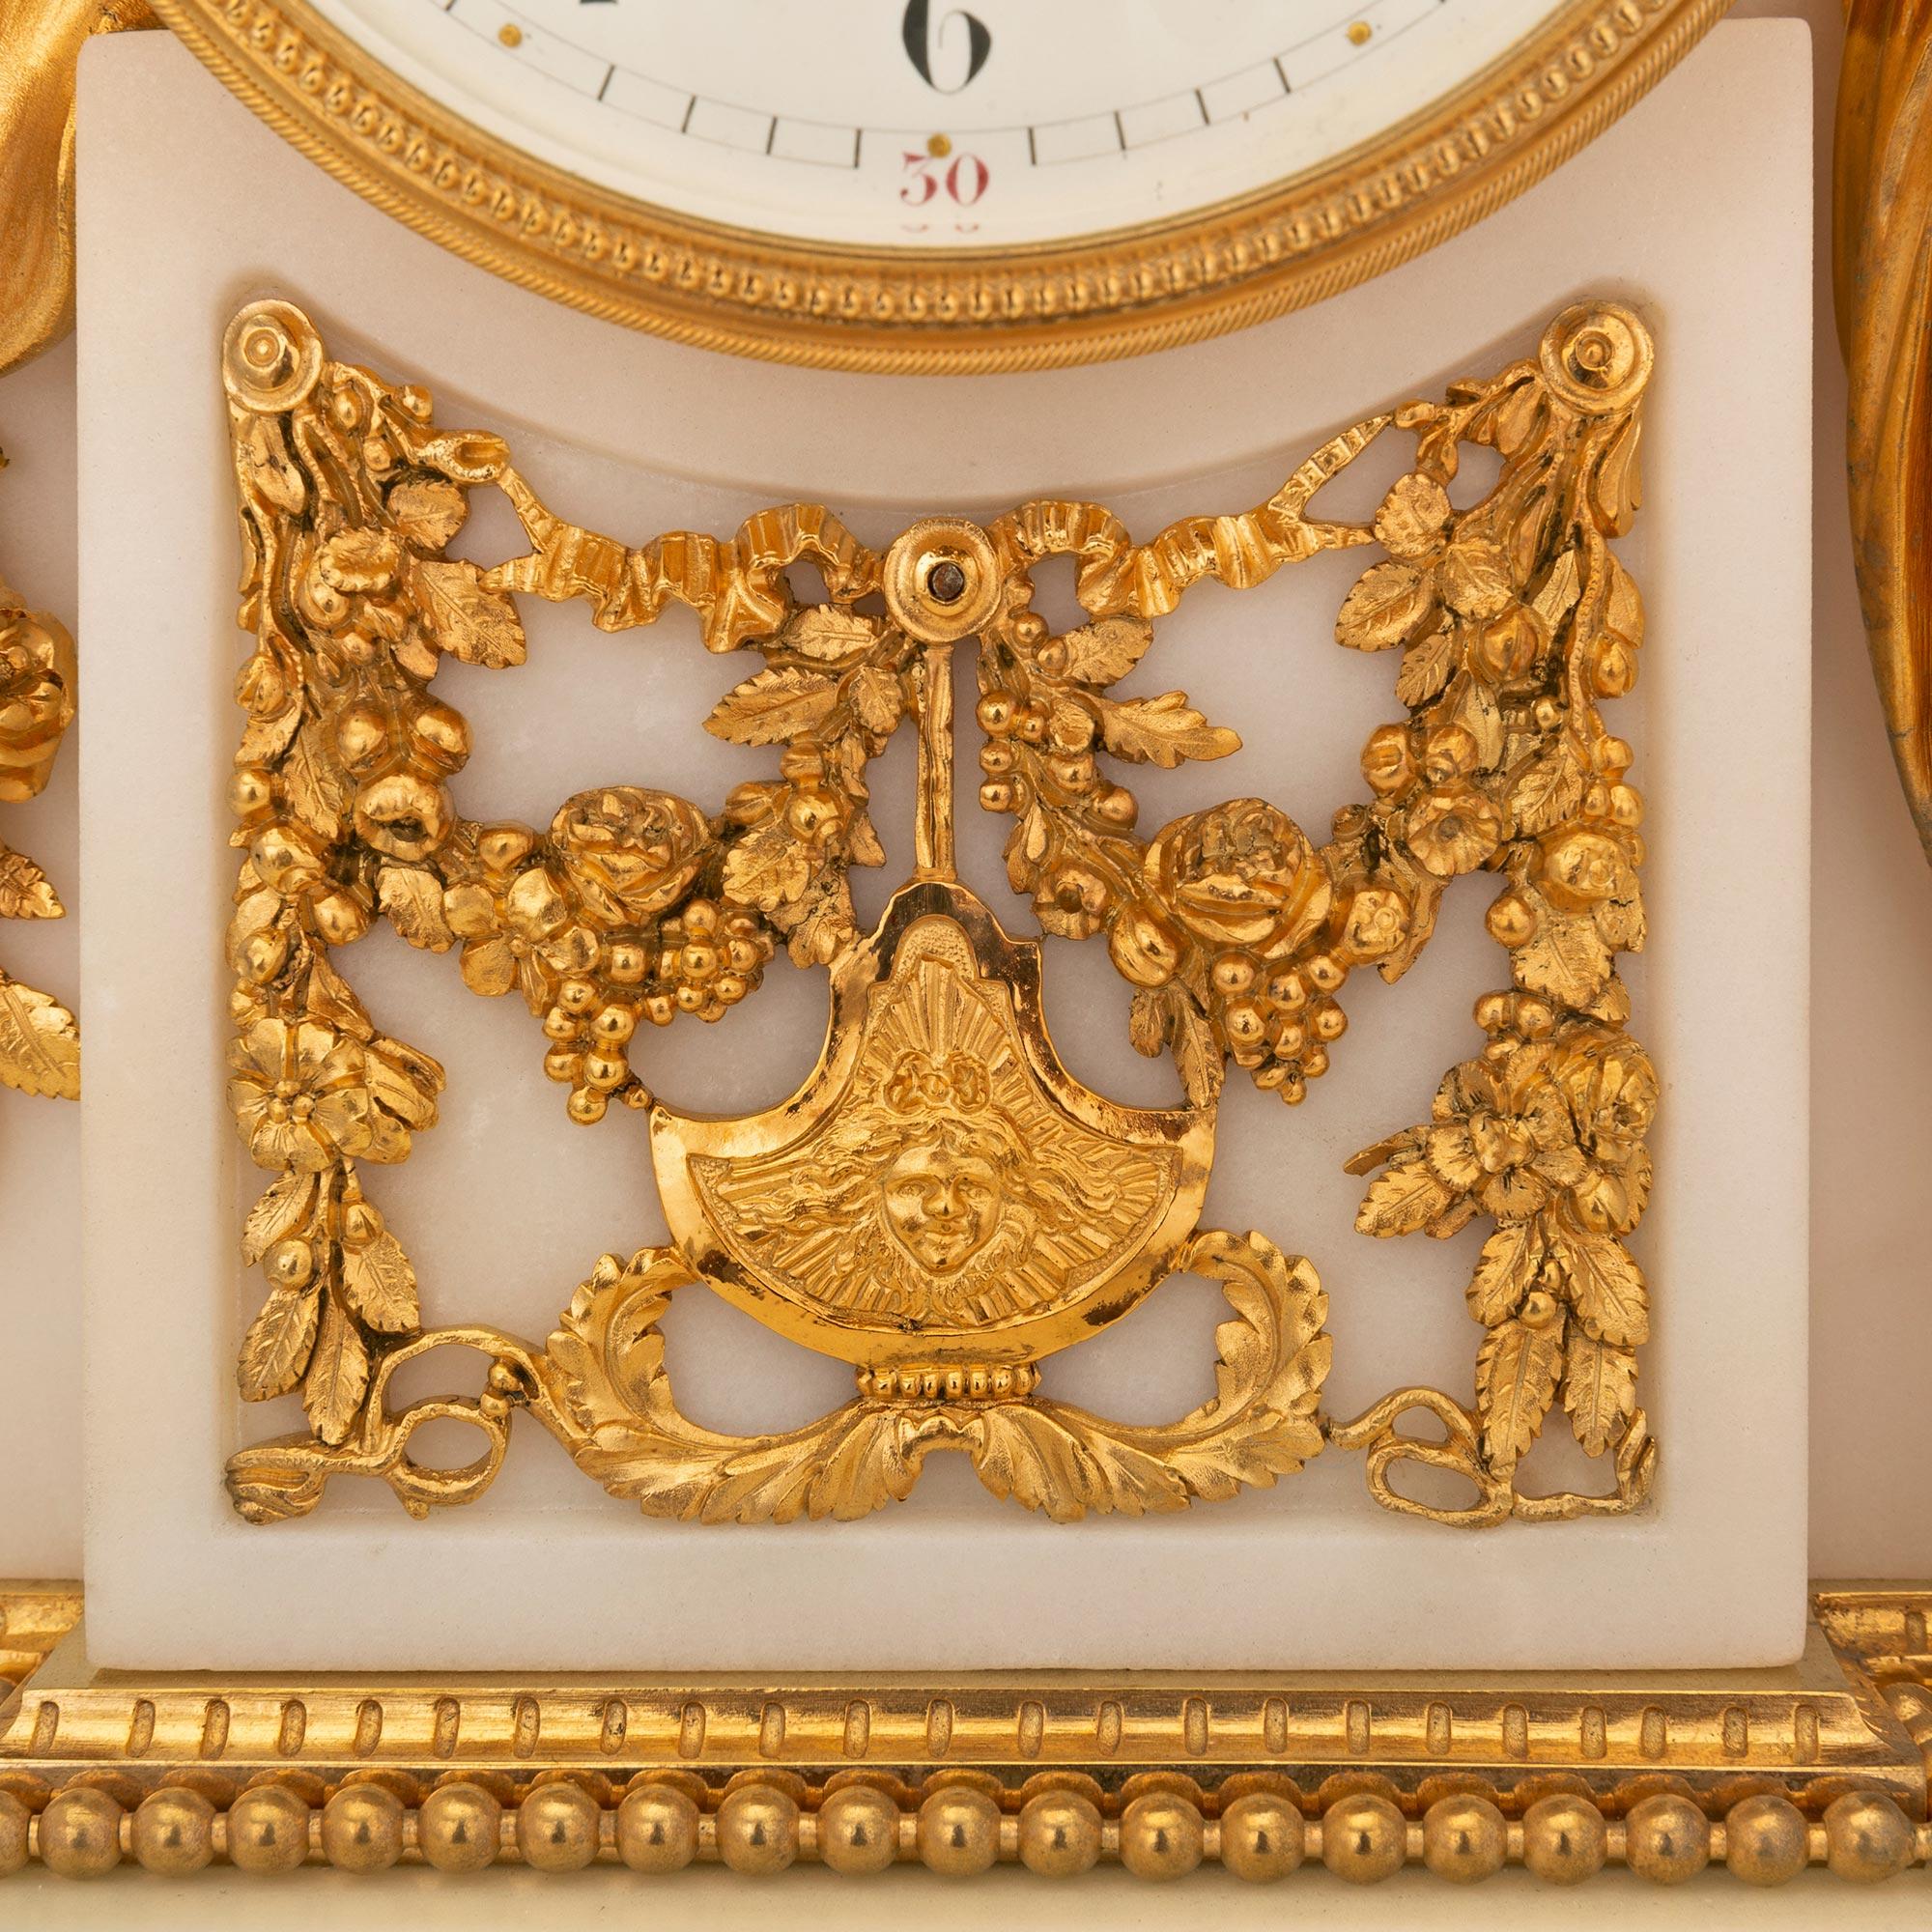 French Mid-19th Century Louis XVI Style Marble and Ormolu Clock For Sale 4